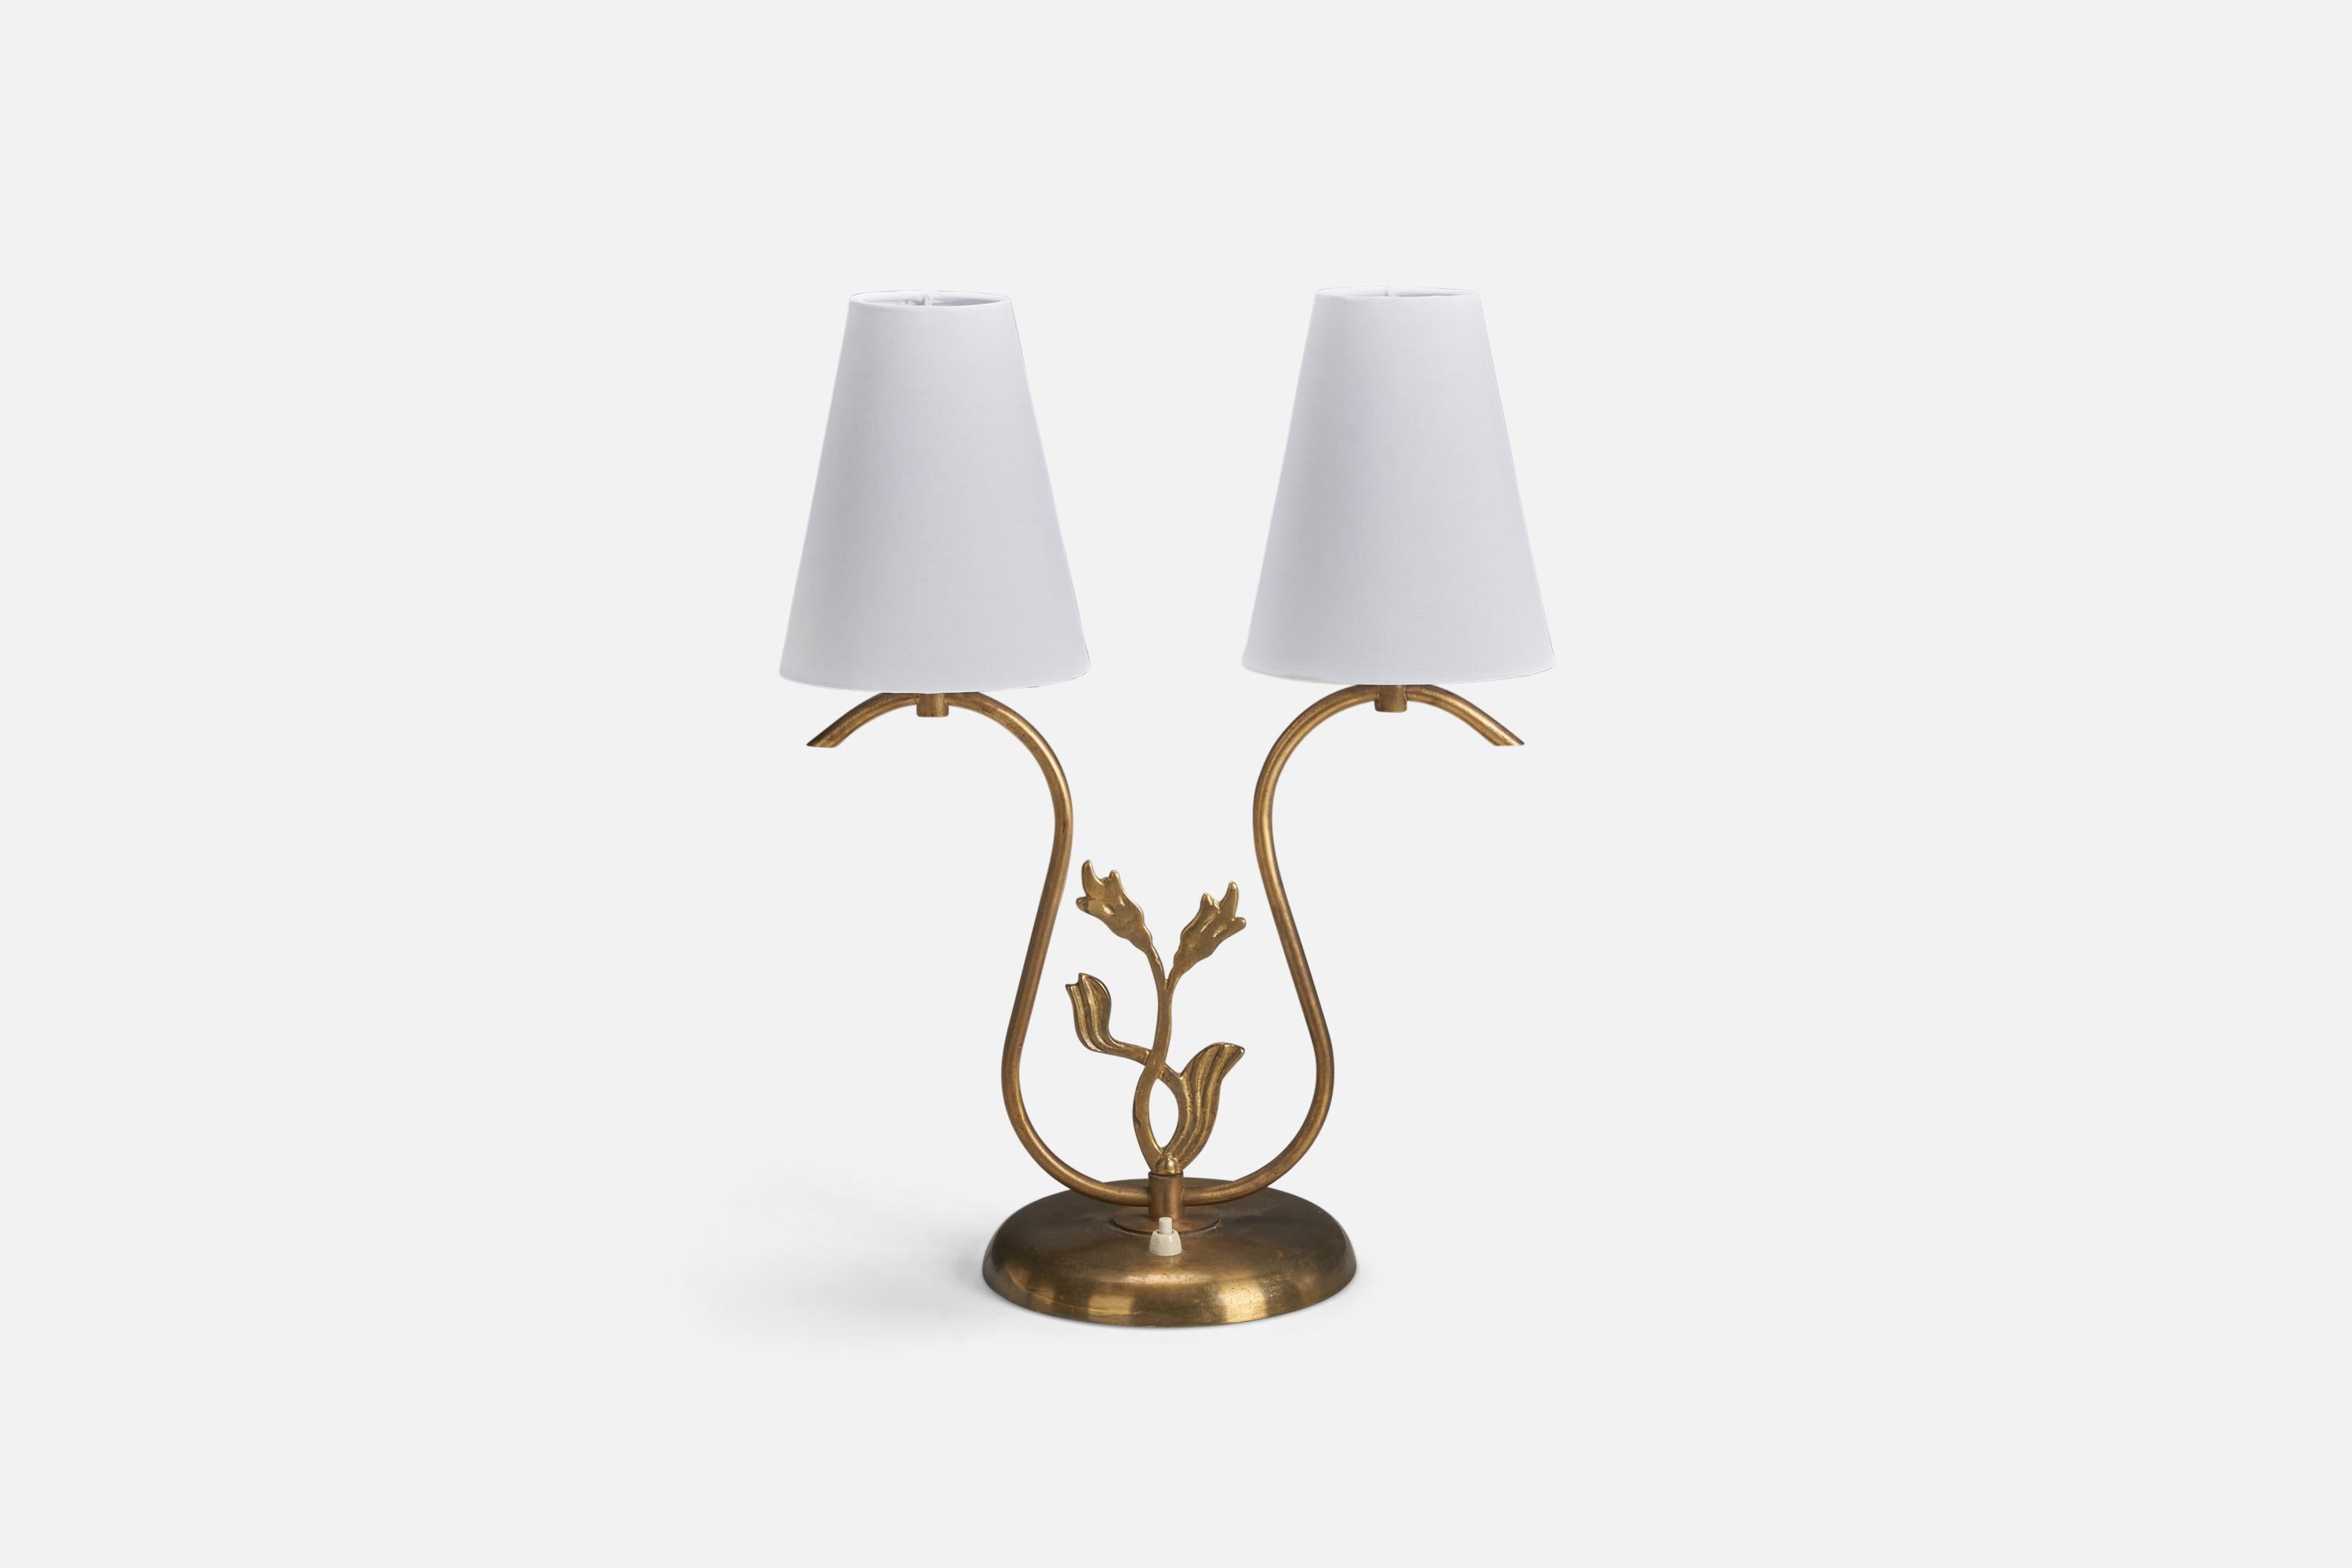 A brass and fabric table lamp designed and produced by a Swedish Designer, Sweden, 1940s.

Dimensions of Lamp (inches) : 13.62 x 12.93 x 6.87 (Height x Width x Depth)
Dimensions of Lampshade (inches) : 3 x 5.5 x 6.5 (Top Diameter x Bottom